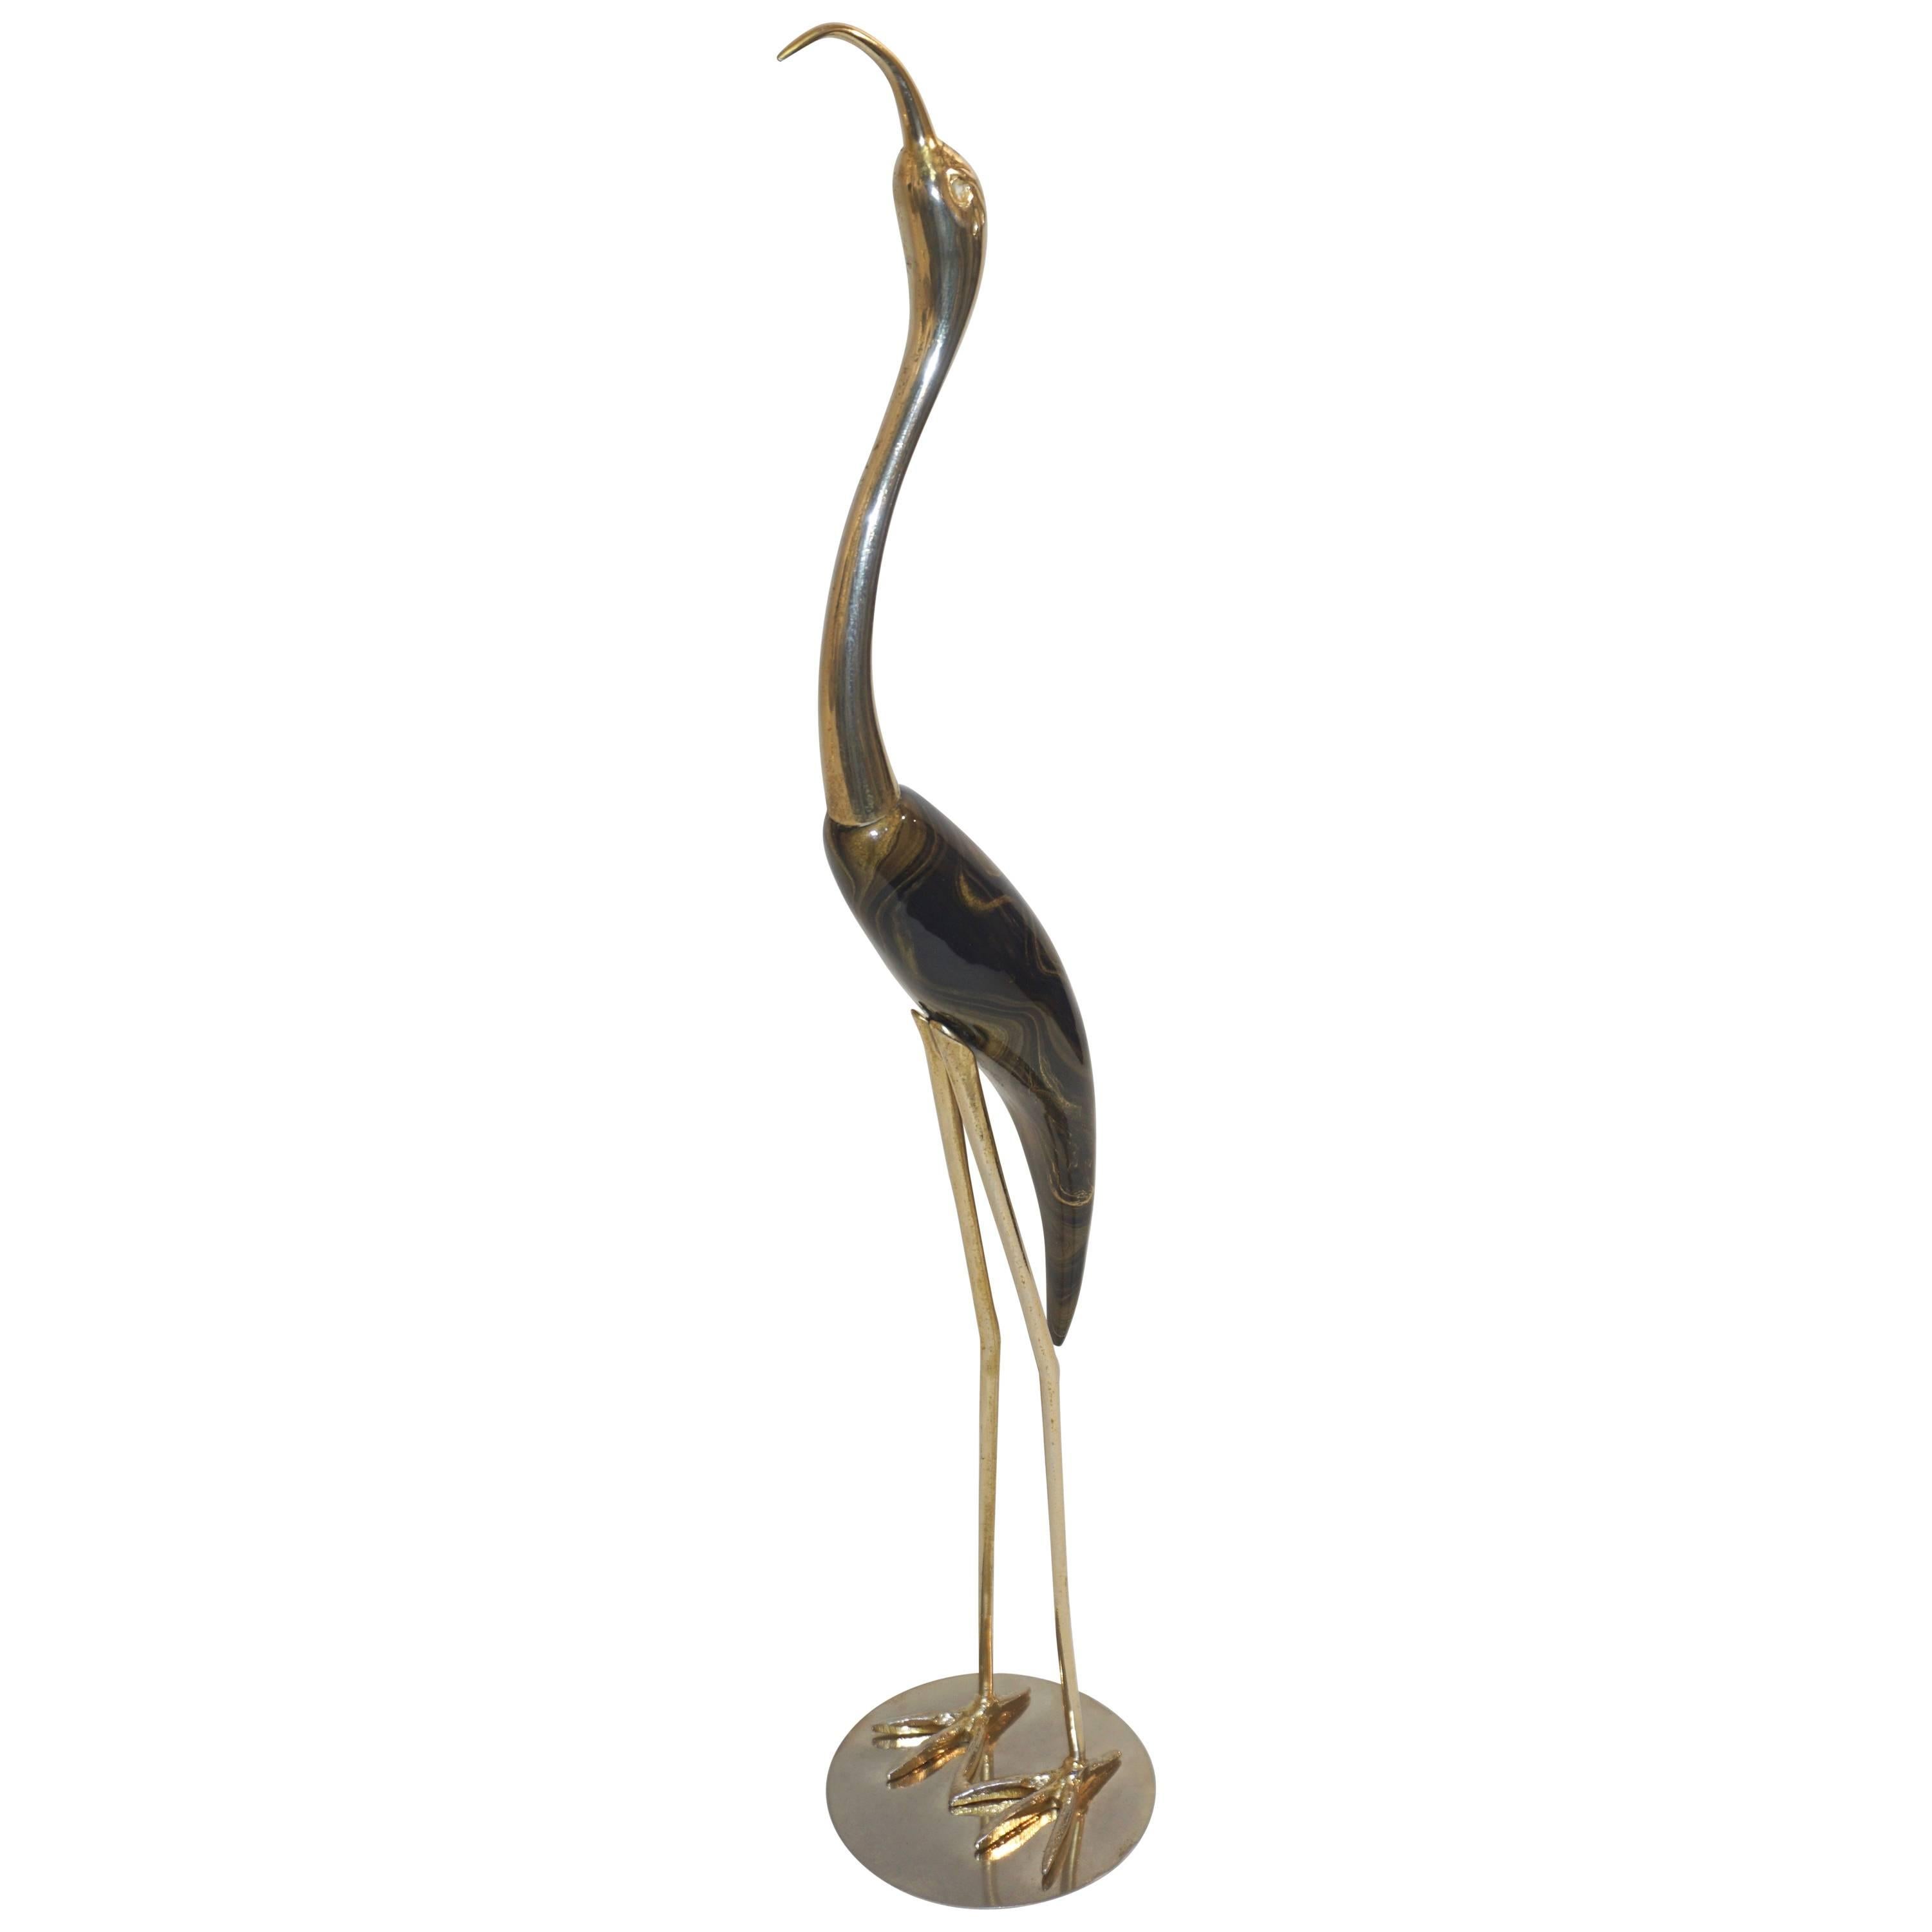 1960s Italian organic sculpture, modern brass bird by Antonio Pavia with a hand-carved wood body decorated and hand enameled in trompe-l'oeil to make it resemble brown marble with golden veins. 
Base dimensions: 4 in x 4 in
Can be complemented by